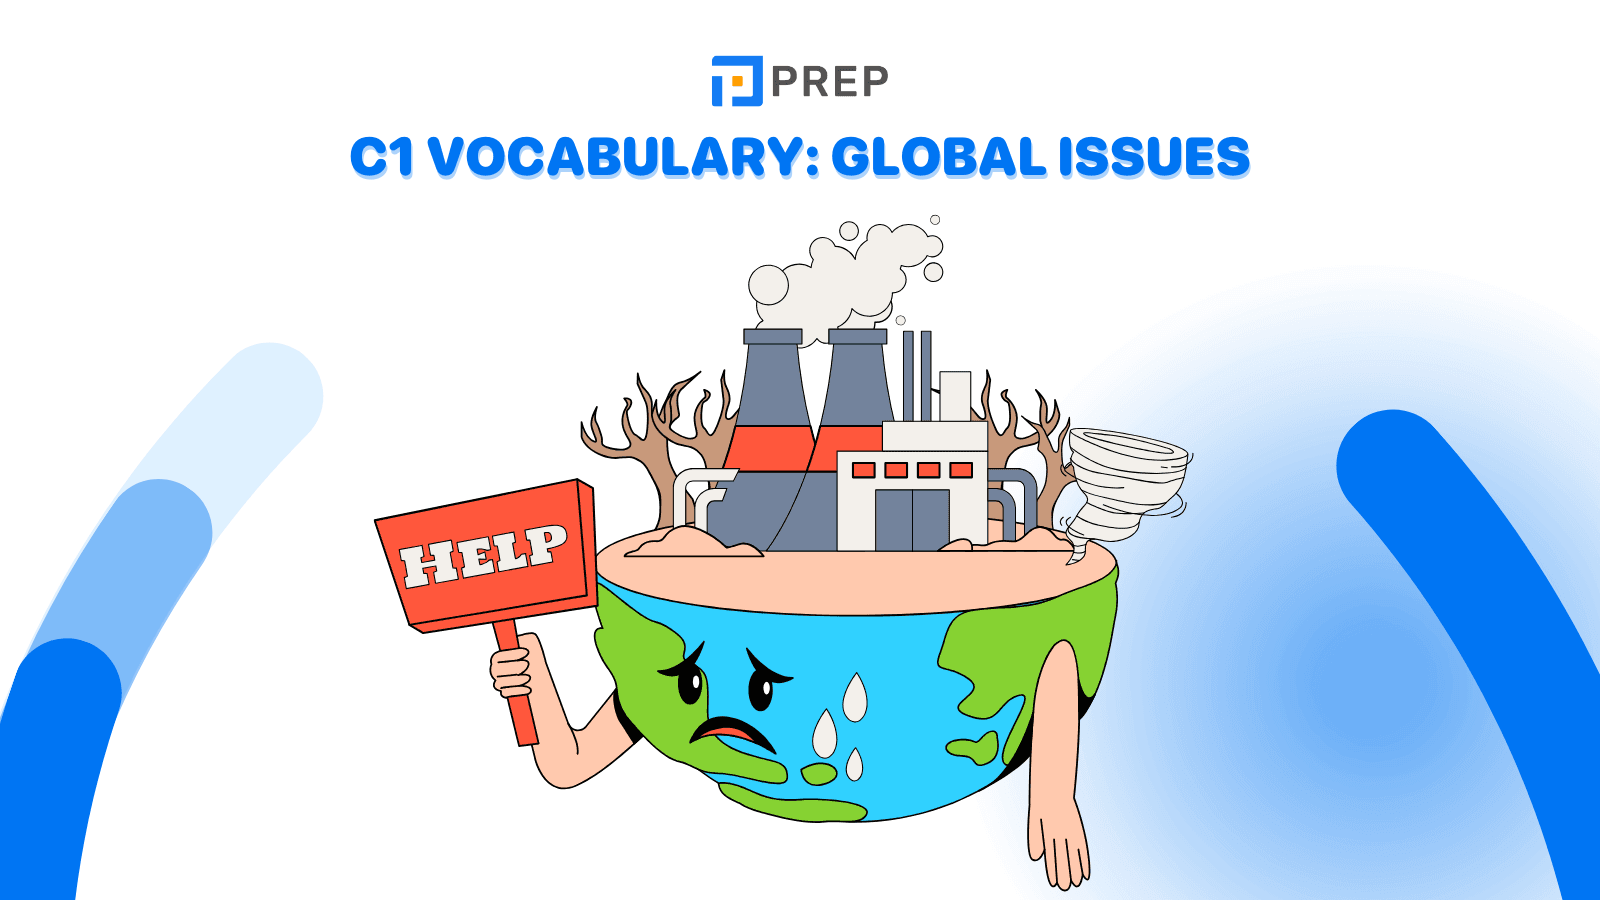 C1 vocabulary: Global issues